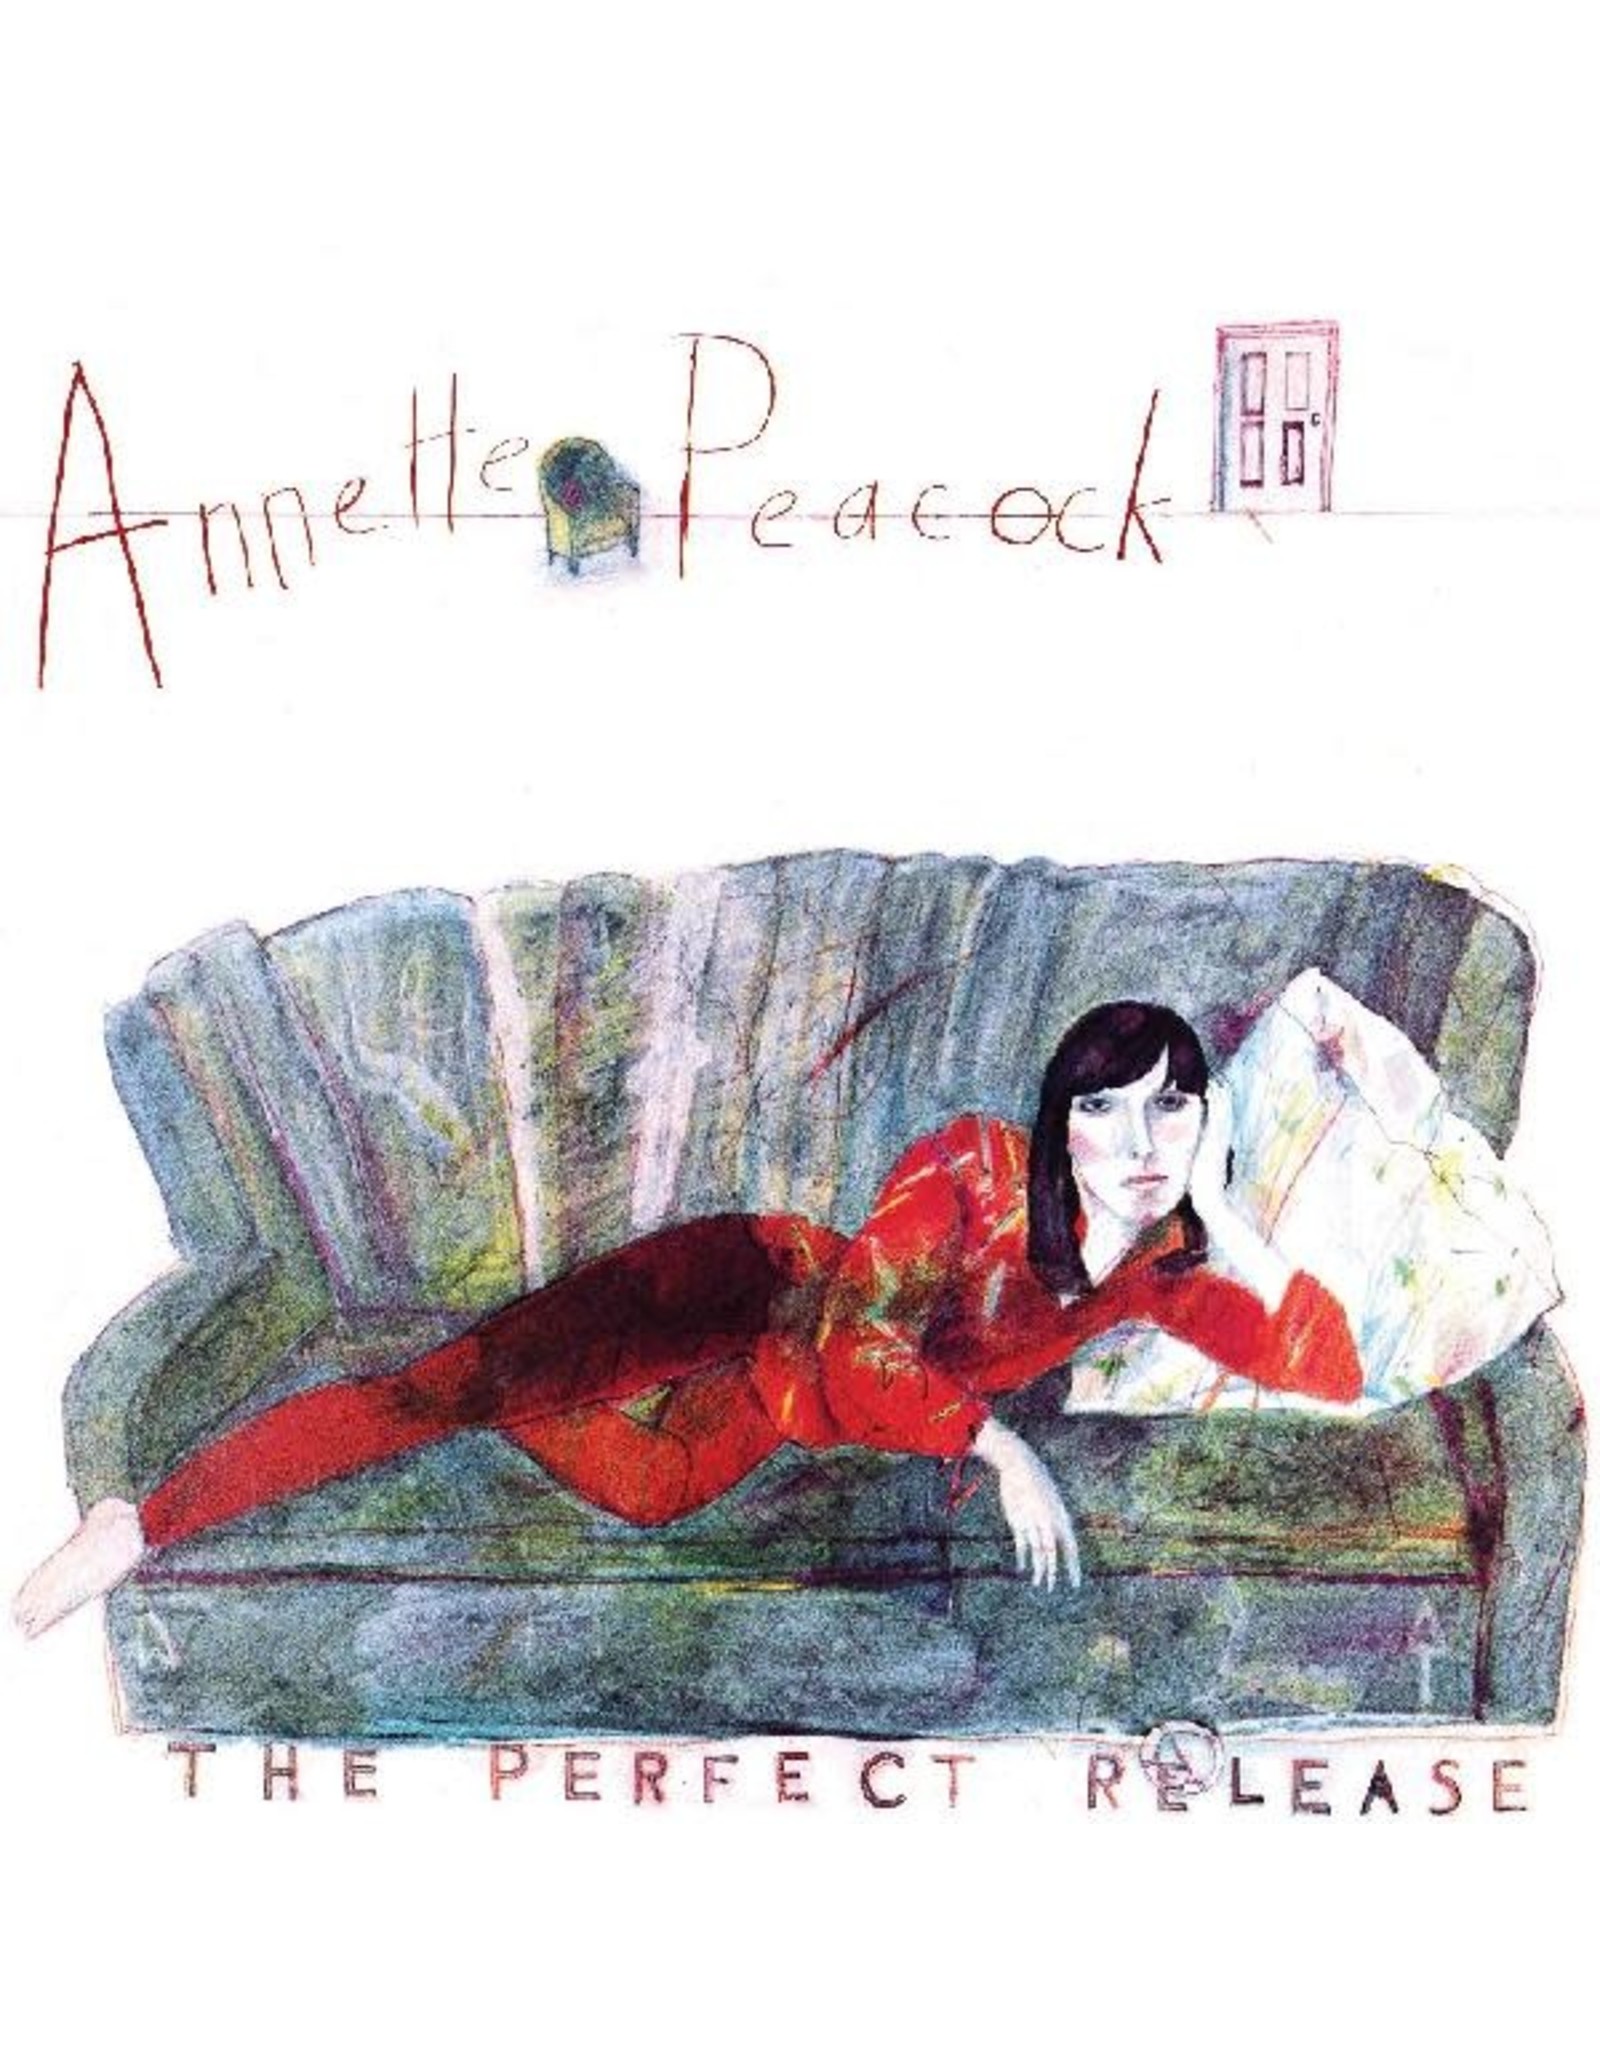 New Vinyl Annette Peacock - The Perfect Release (Colored) LP